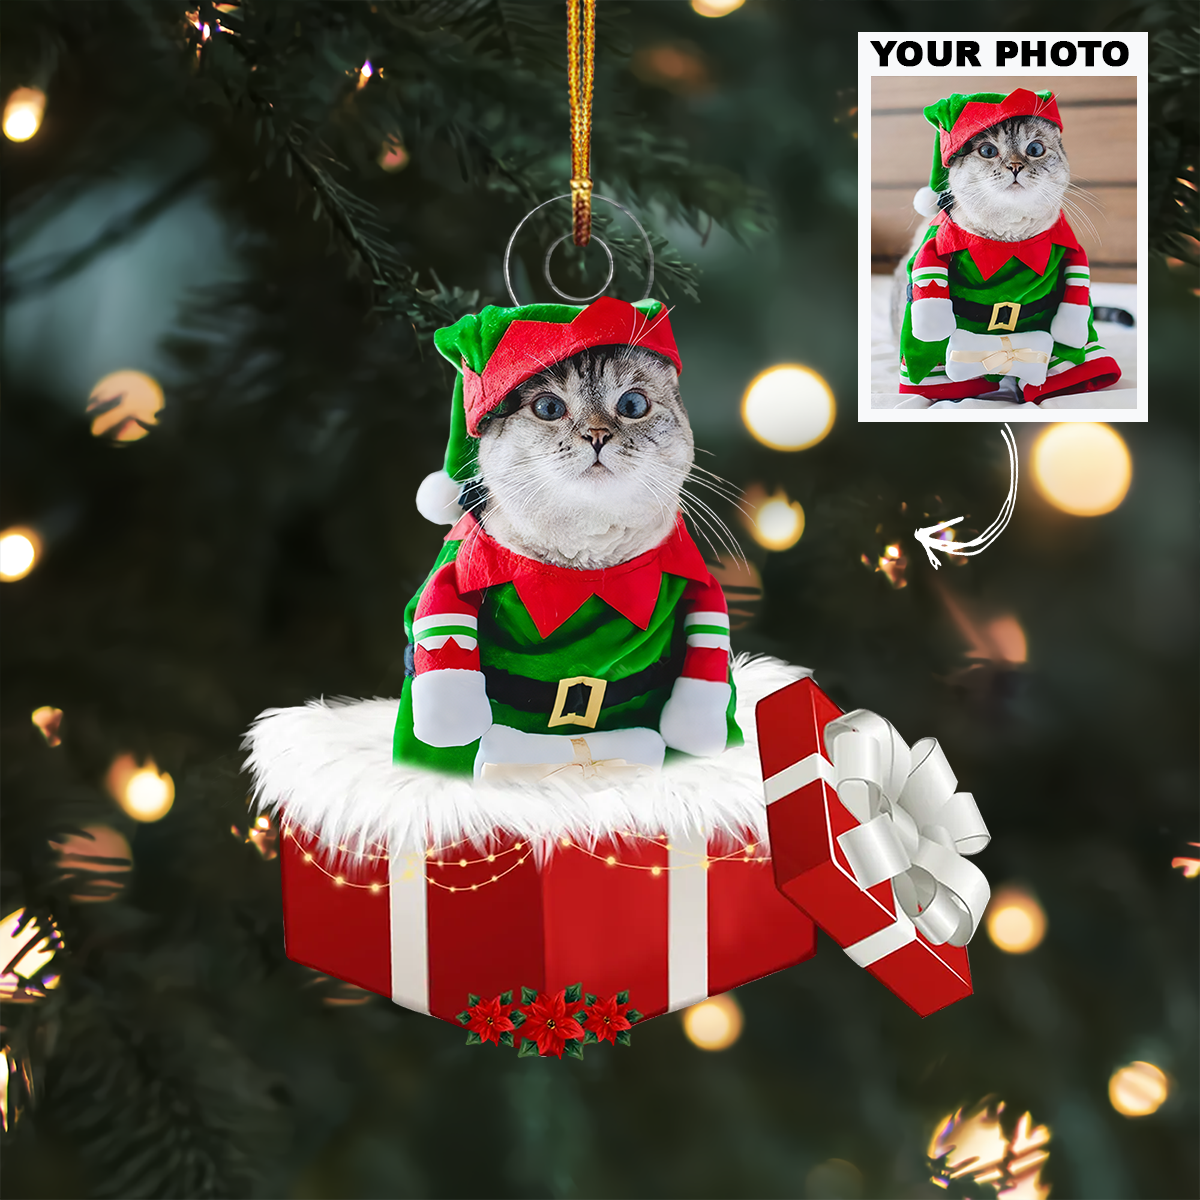 Pet Christmas Gift - Personalized Photo Mica Ornament - Christmas Gift For Pet Lovers, Cat Mom, Dog Mom UPL0HD040